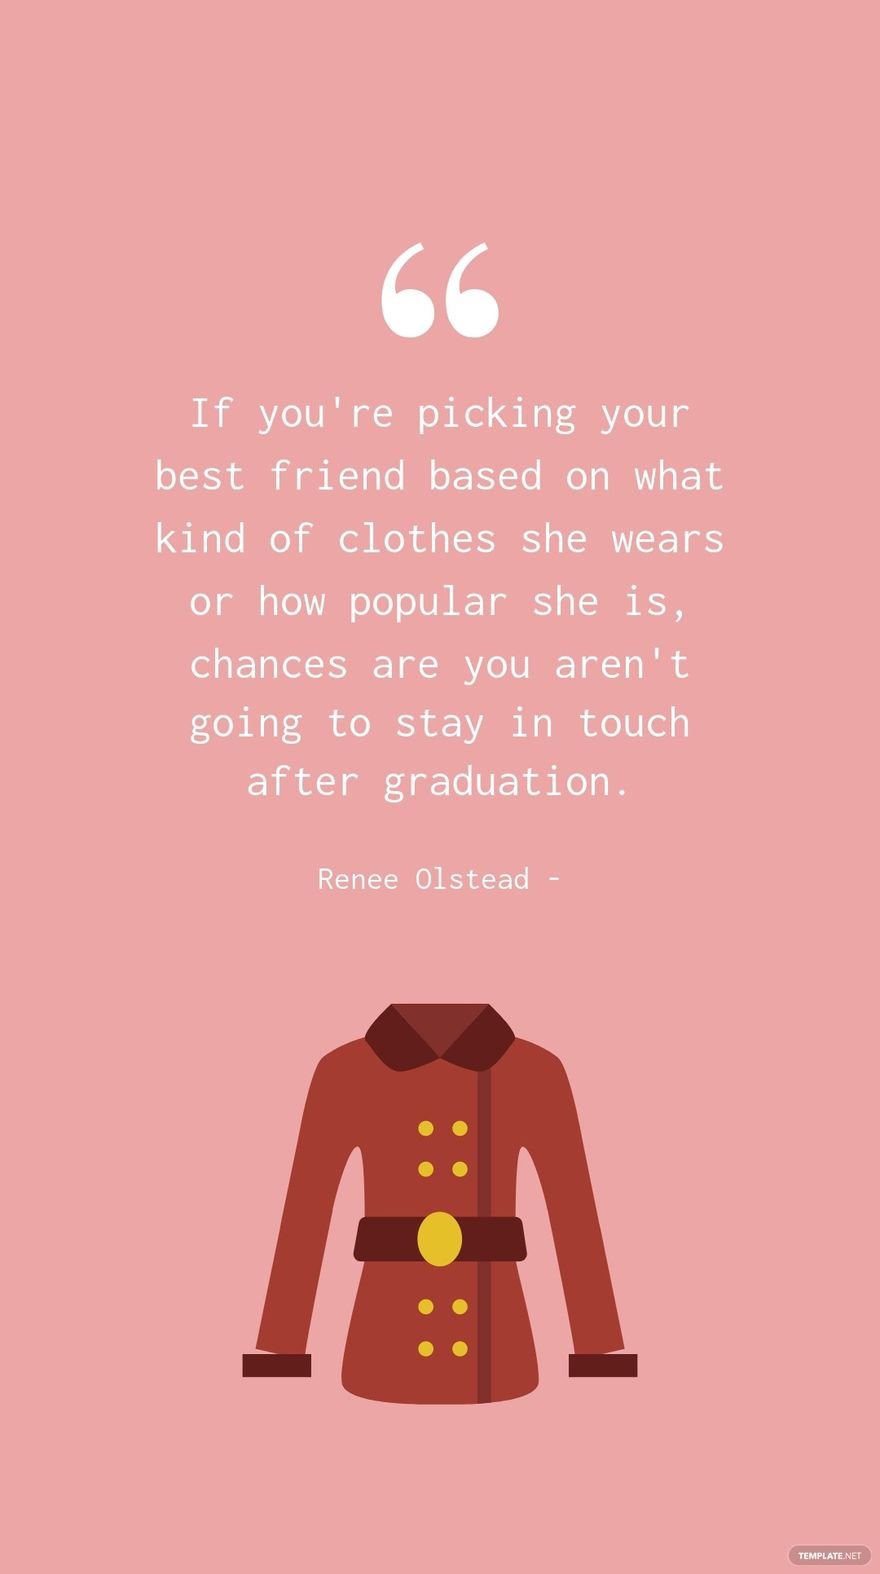 Renee Olstead - If you're picking your best friend based on what kind of clothes she wears or how popular she is, chances are you aren't going to stay in touch after graduation.